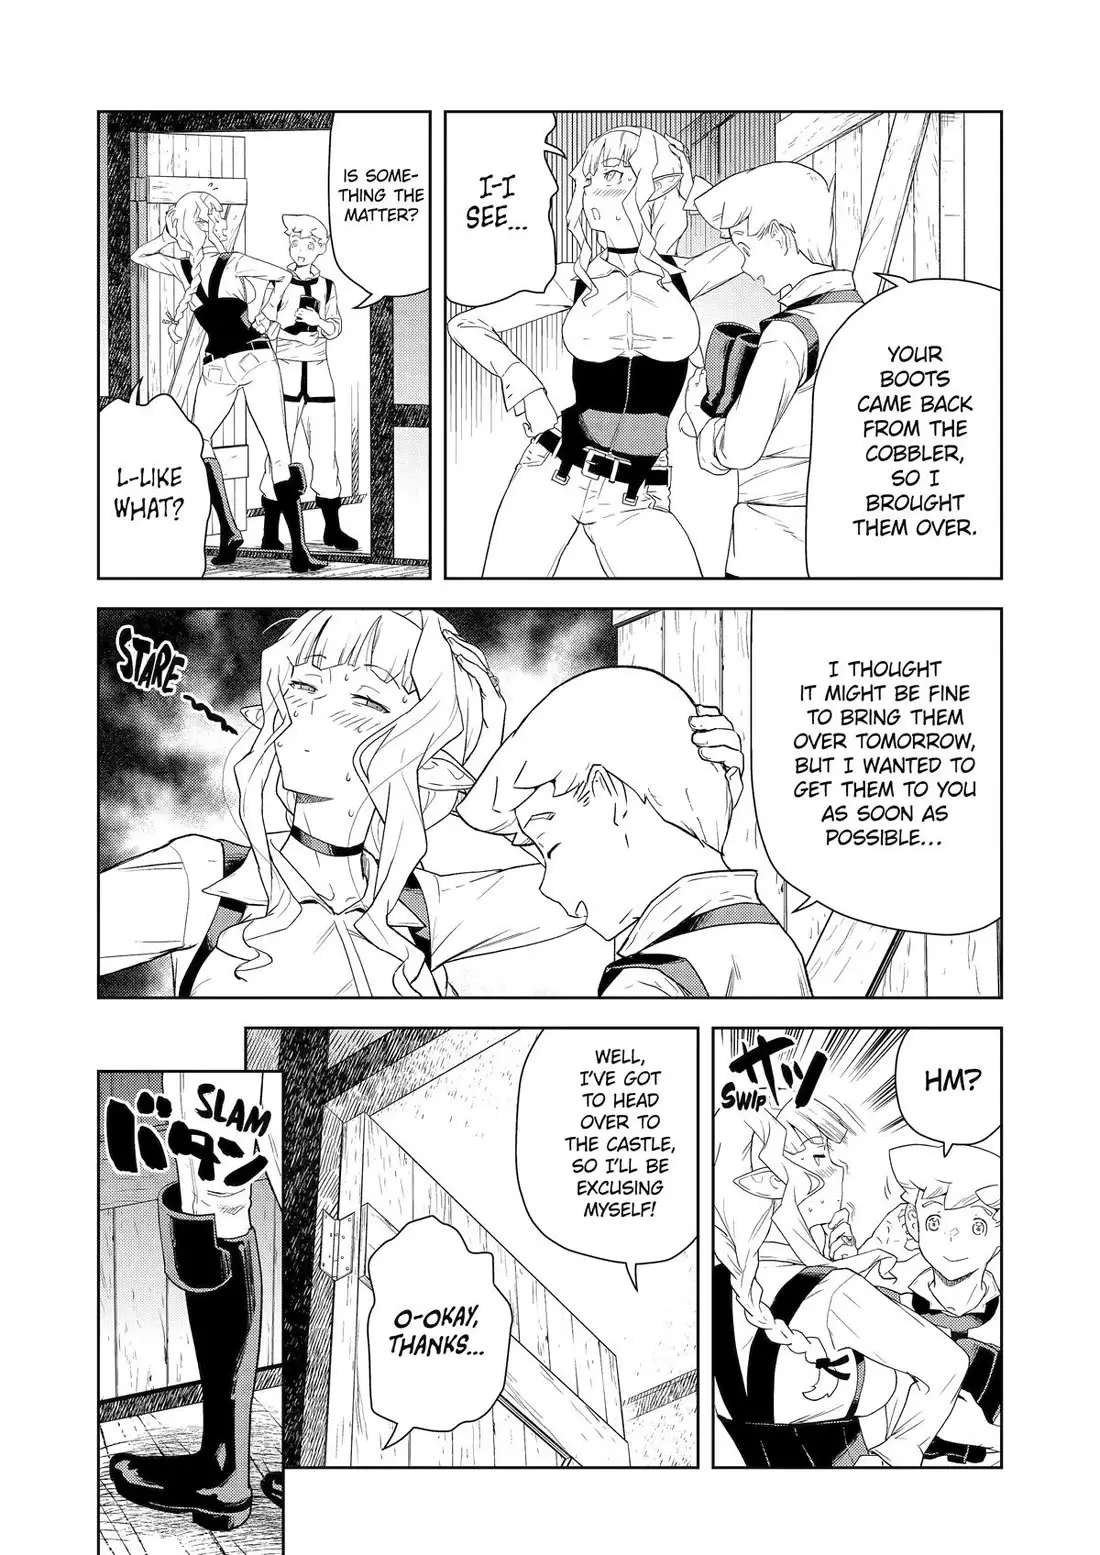 Even The Captain Knight, Miss Elf, Wants To Be A Maiden. - 21 page 6-7704d4c1